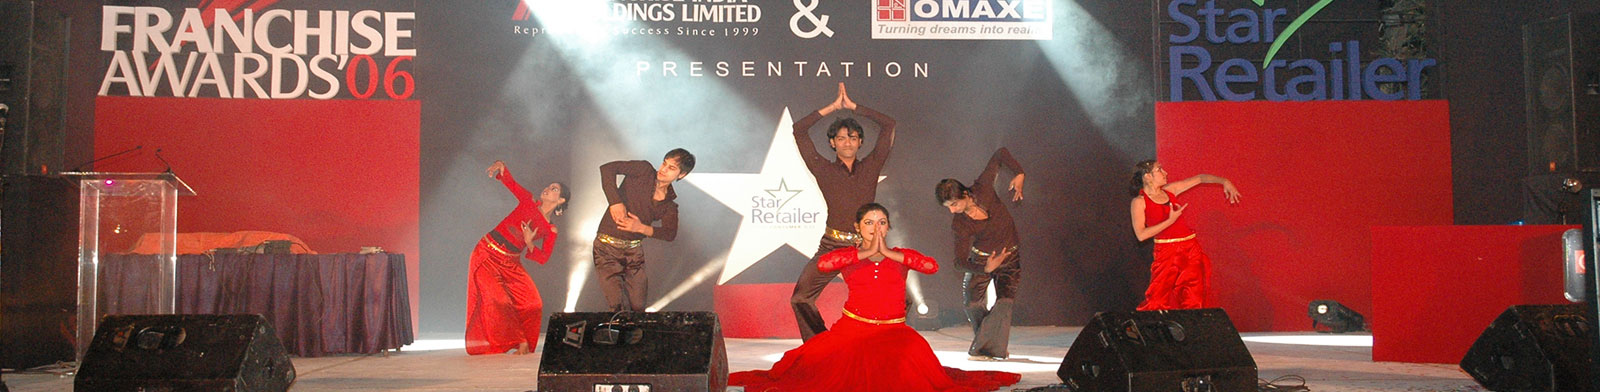 Stage Show Services in India, Stage Show Services in India